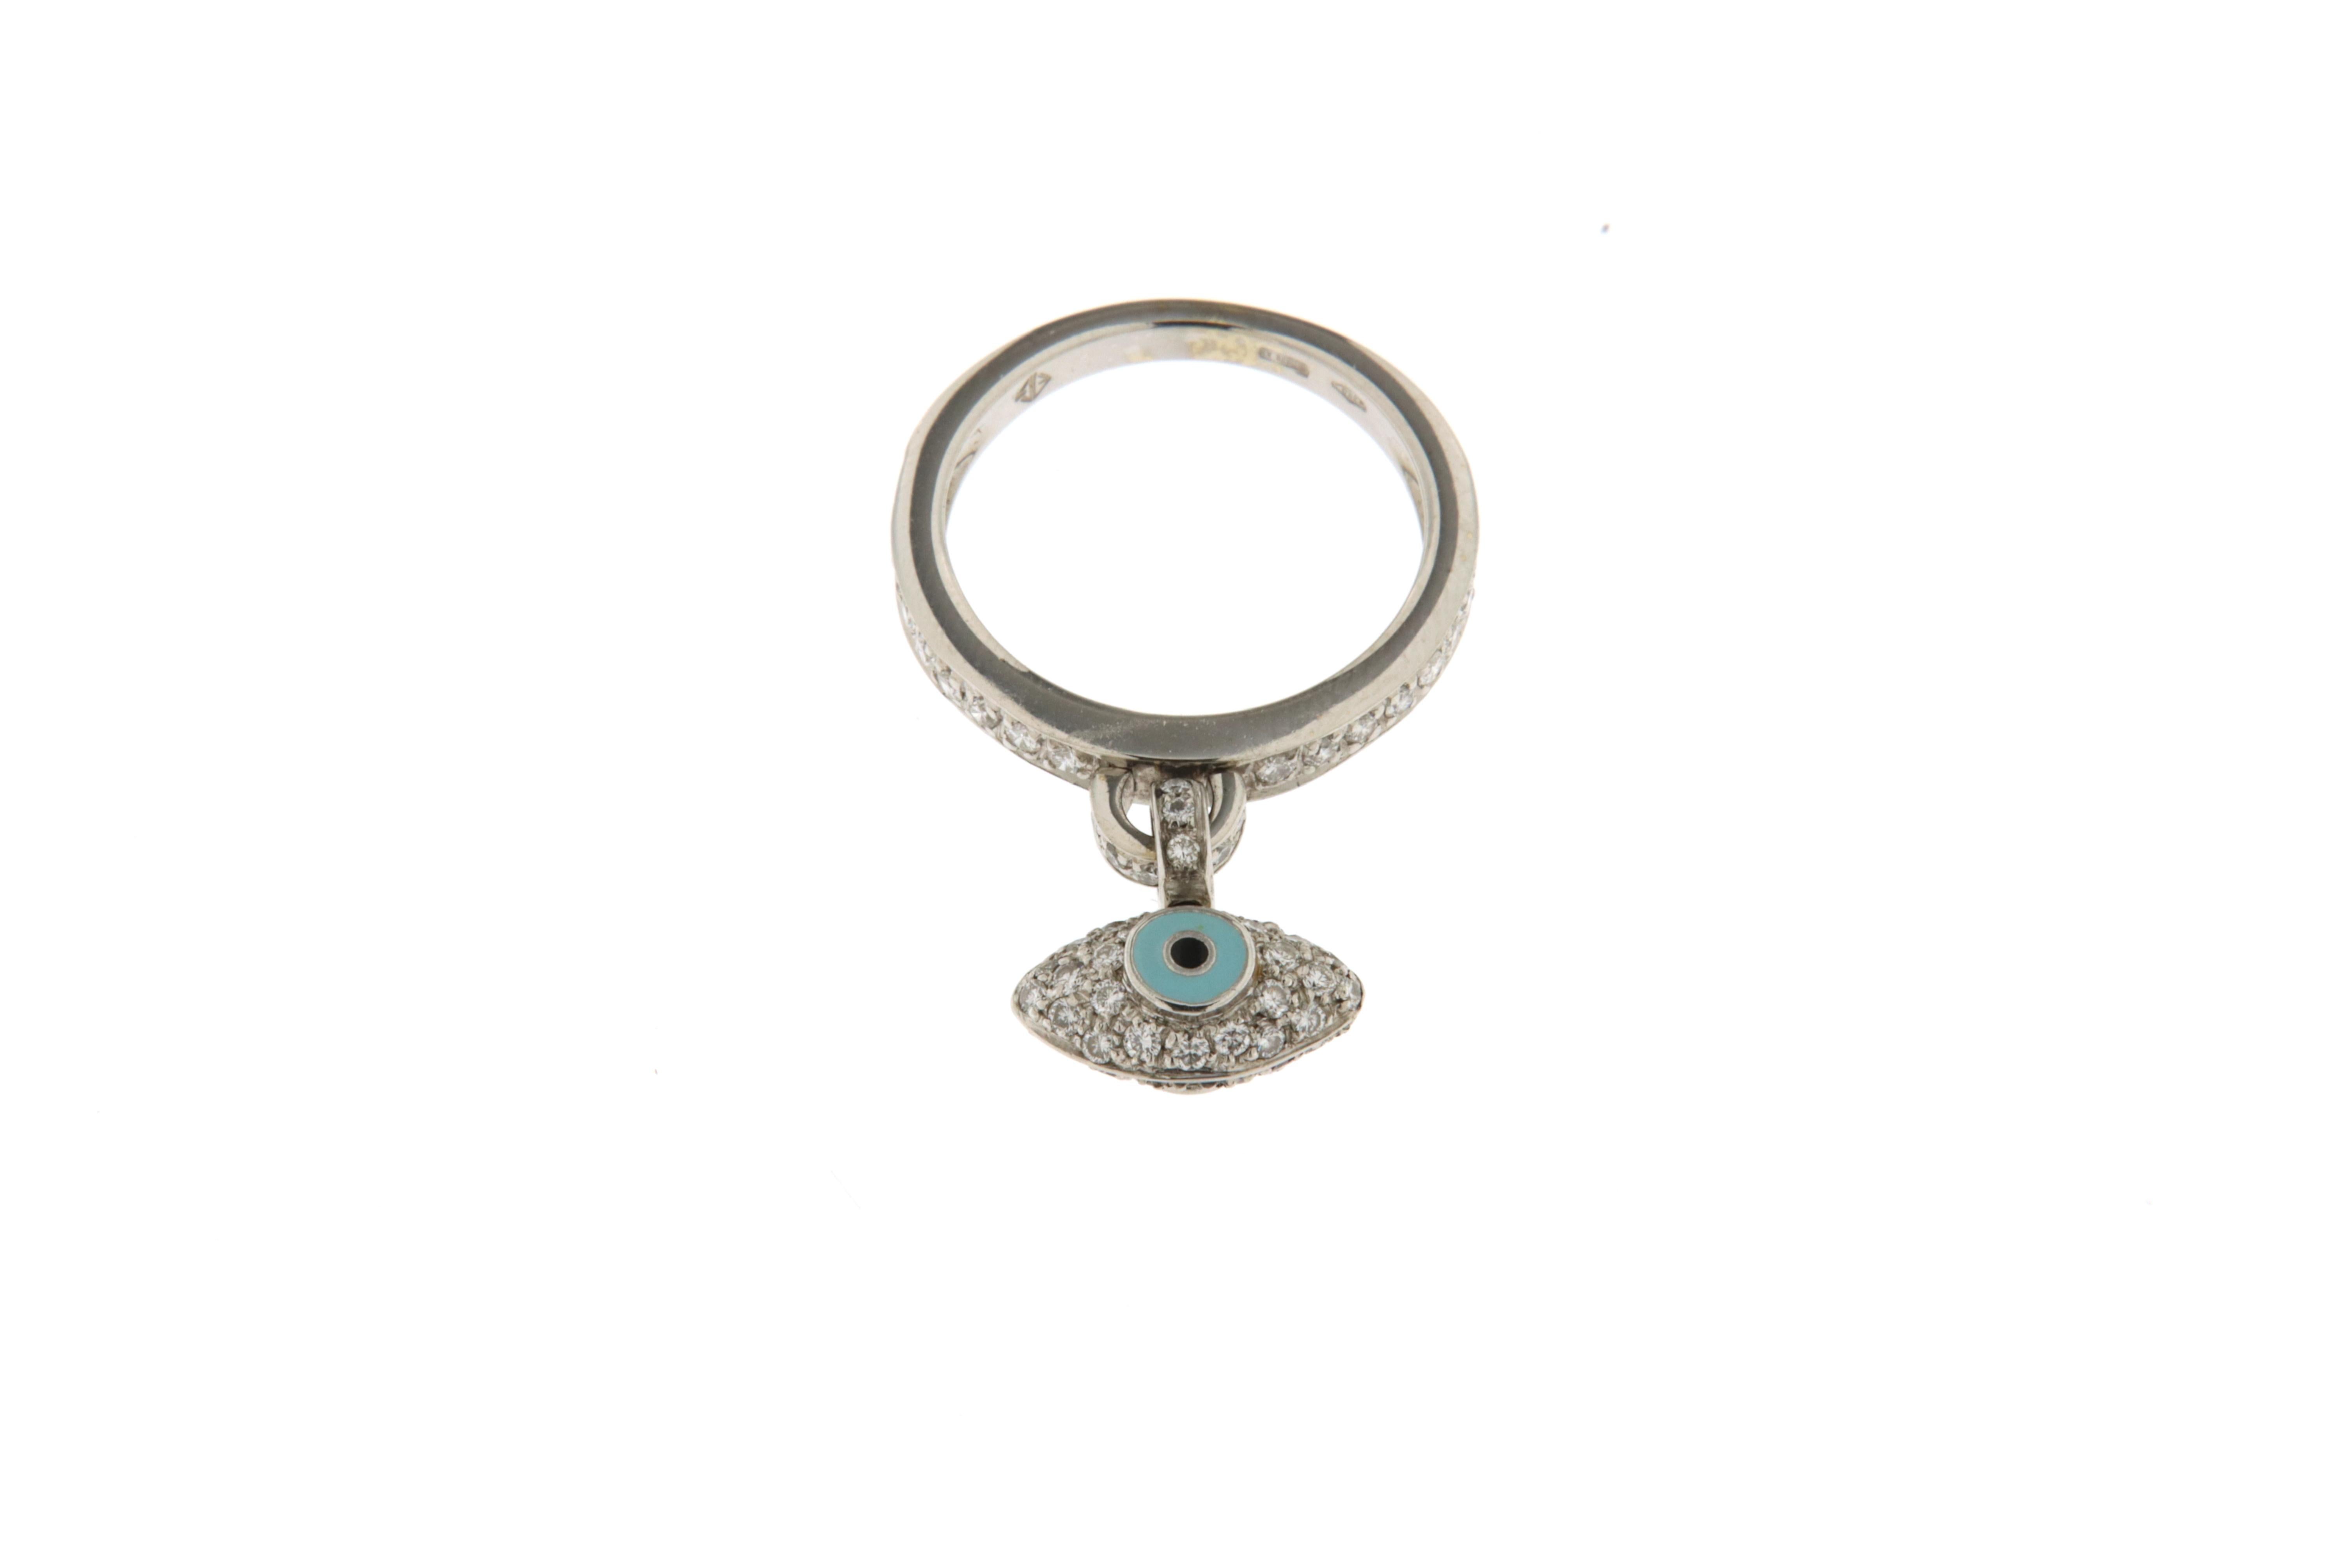 Eternity ring in white gold and diamonds (ct.0.39) with an eye of luck with diamonds and enamel. The eye is made with a diamond pave on both sides. The little eye is pendant in the center of the ring.